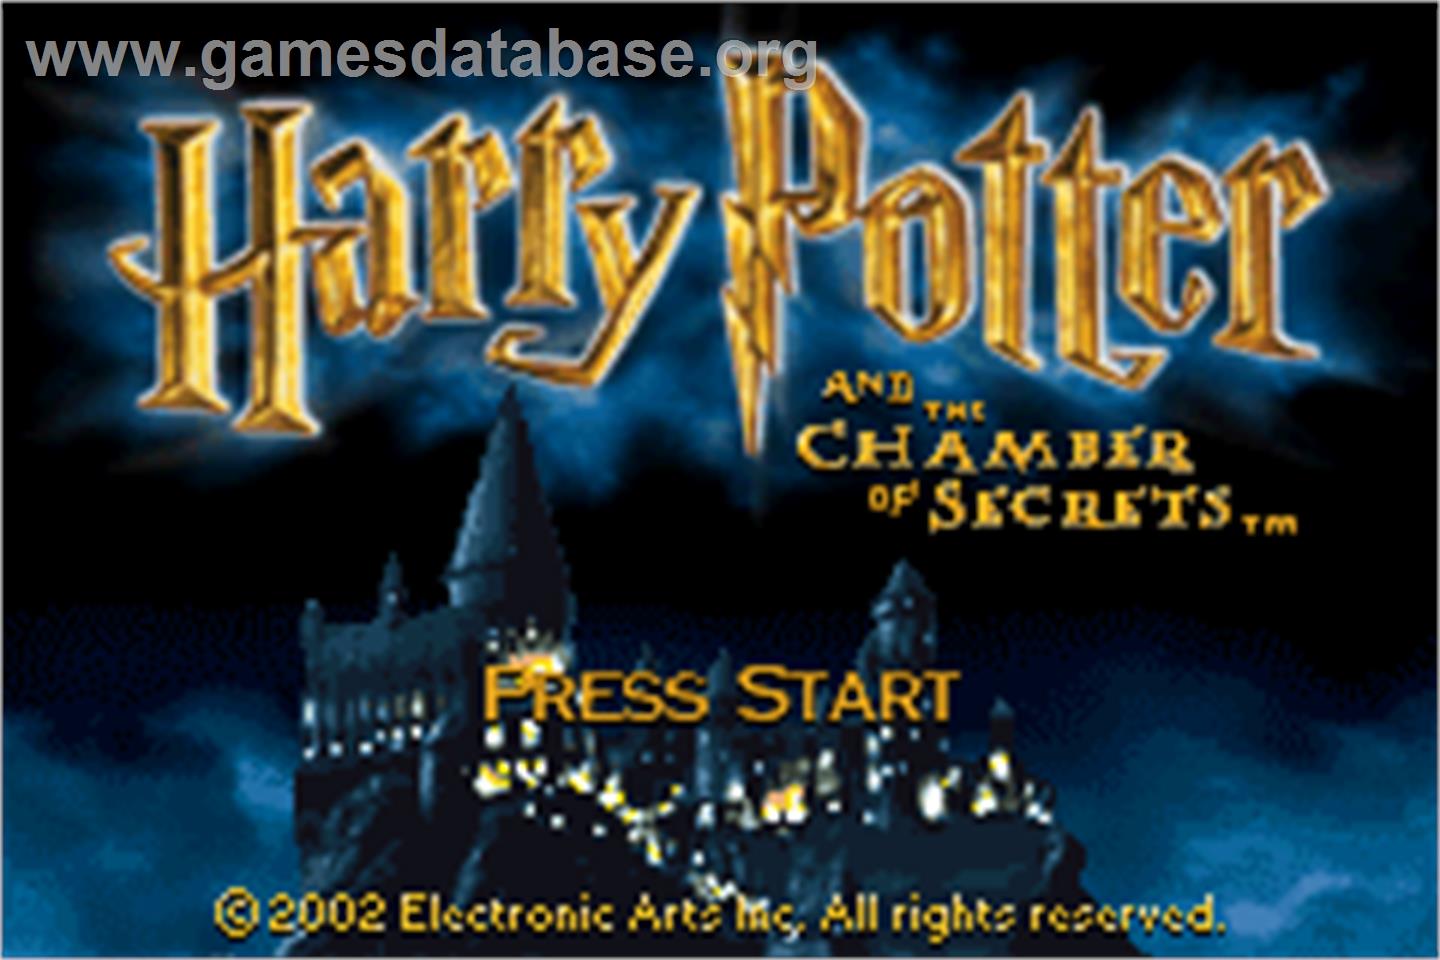 Harry Potter and the Chamber of Secrets - Nintendo Game Boy Advance - Artwork - Title Screen